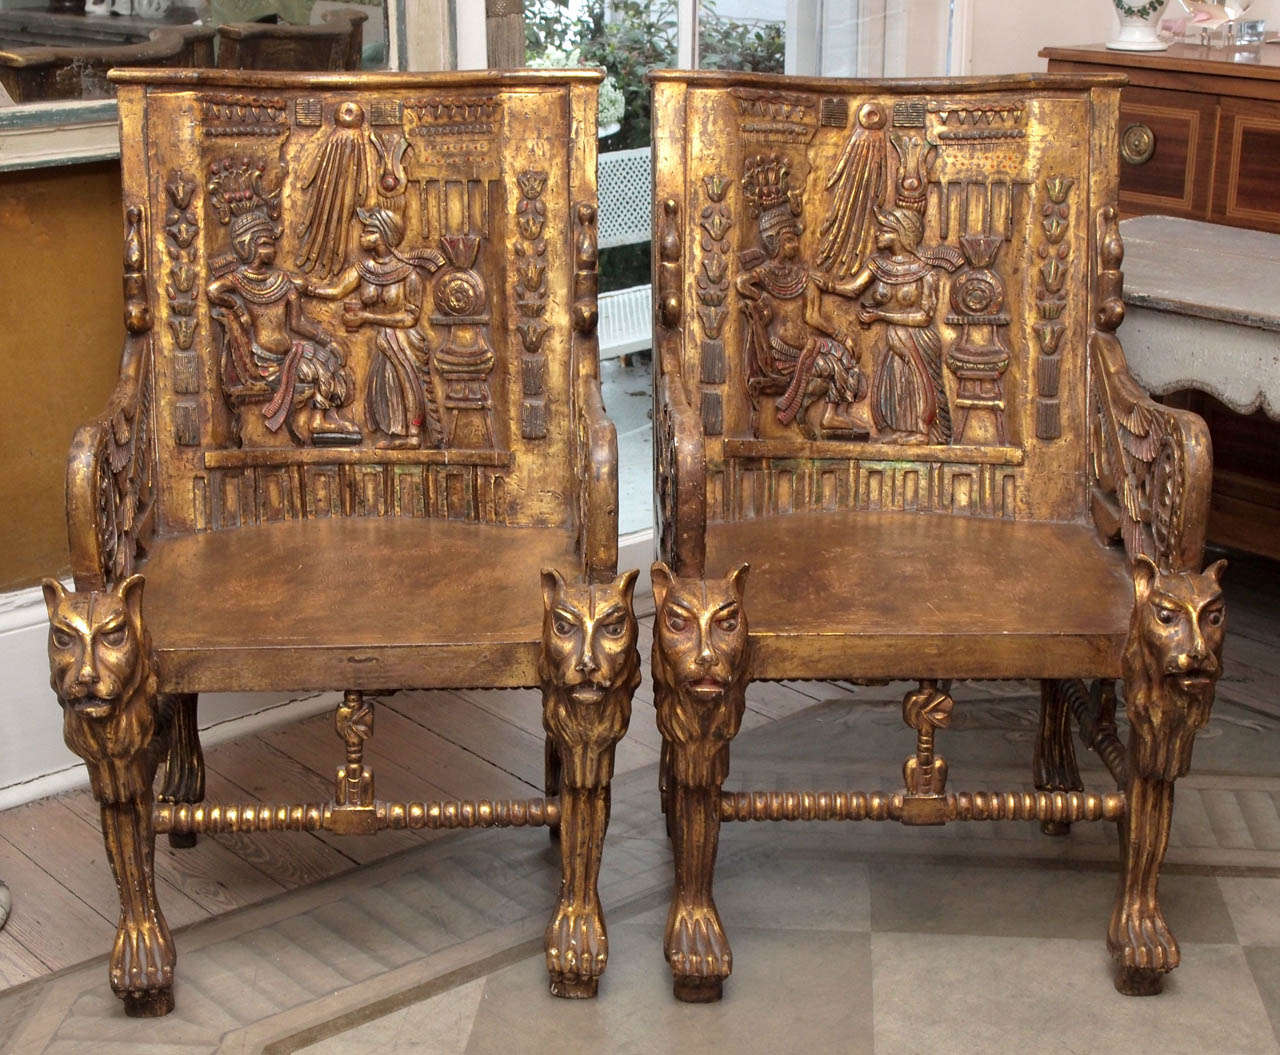 These showstopping Art Deco era chairs were inspired by the throne chairs found in King Tutankhamun's tomb. Giltwood with detailed carving.